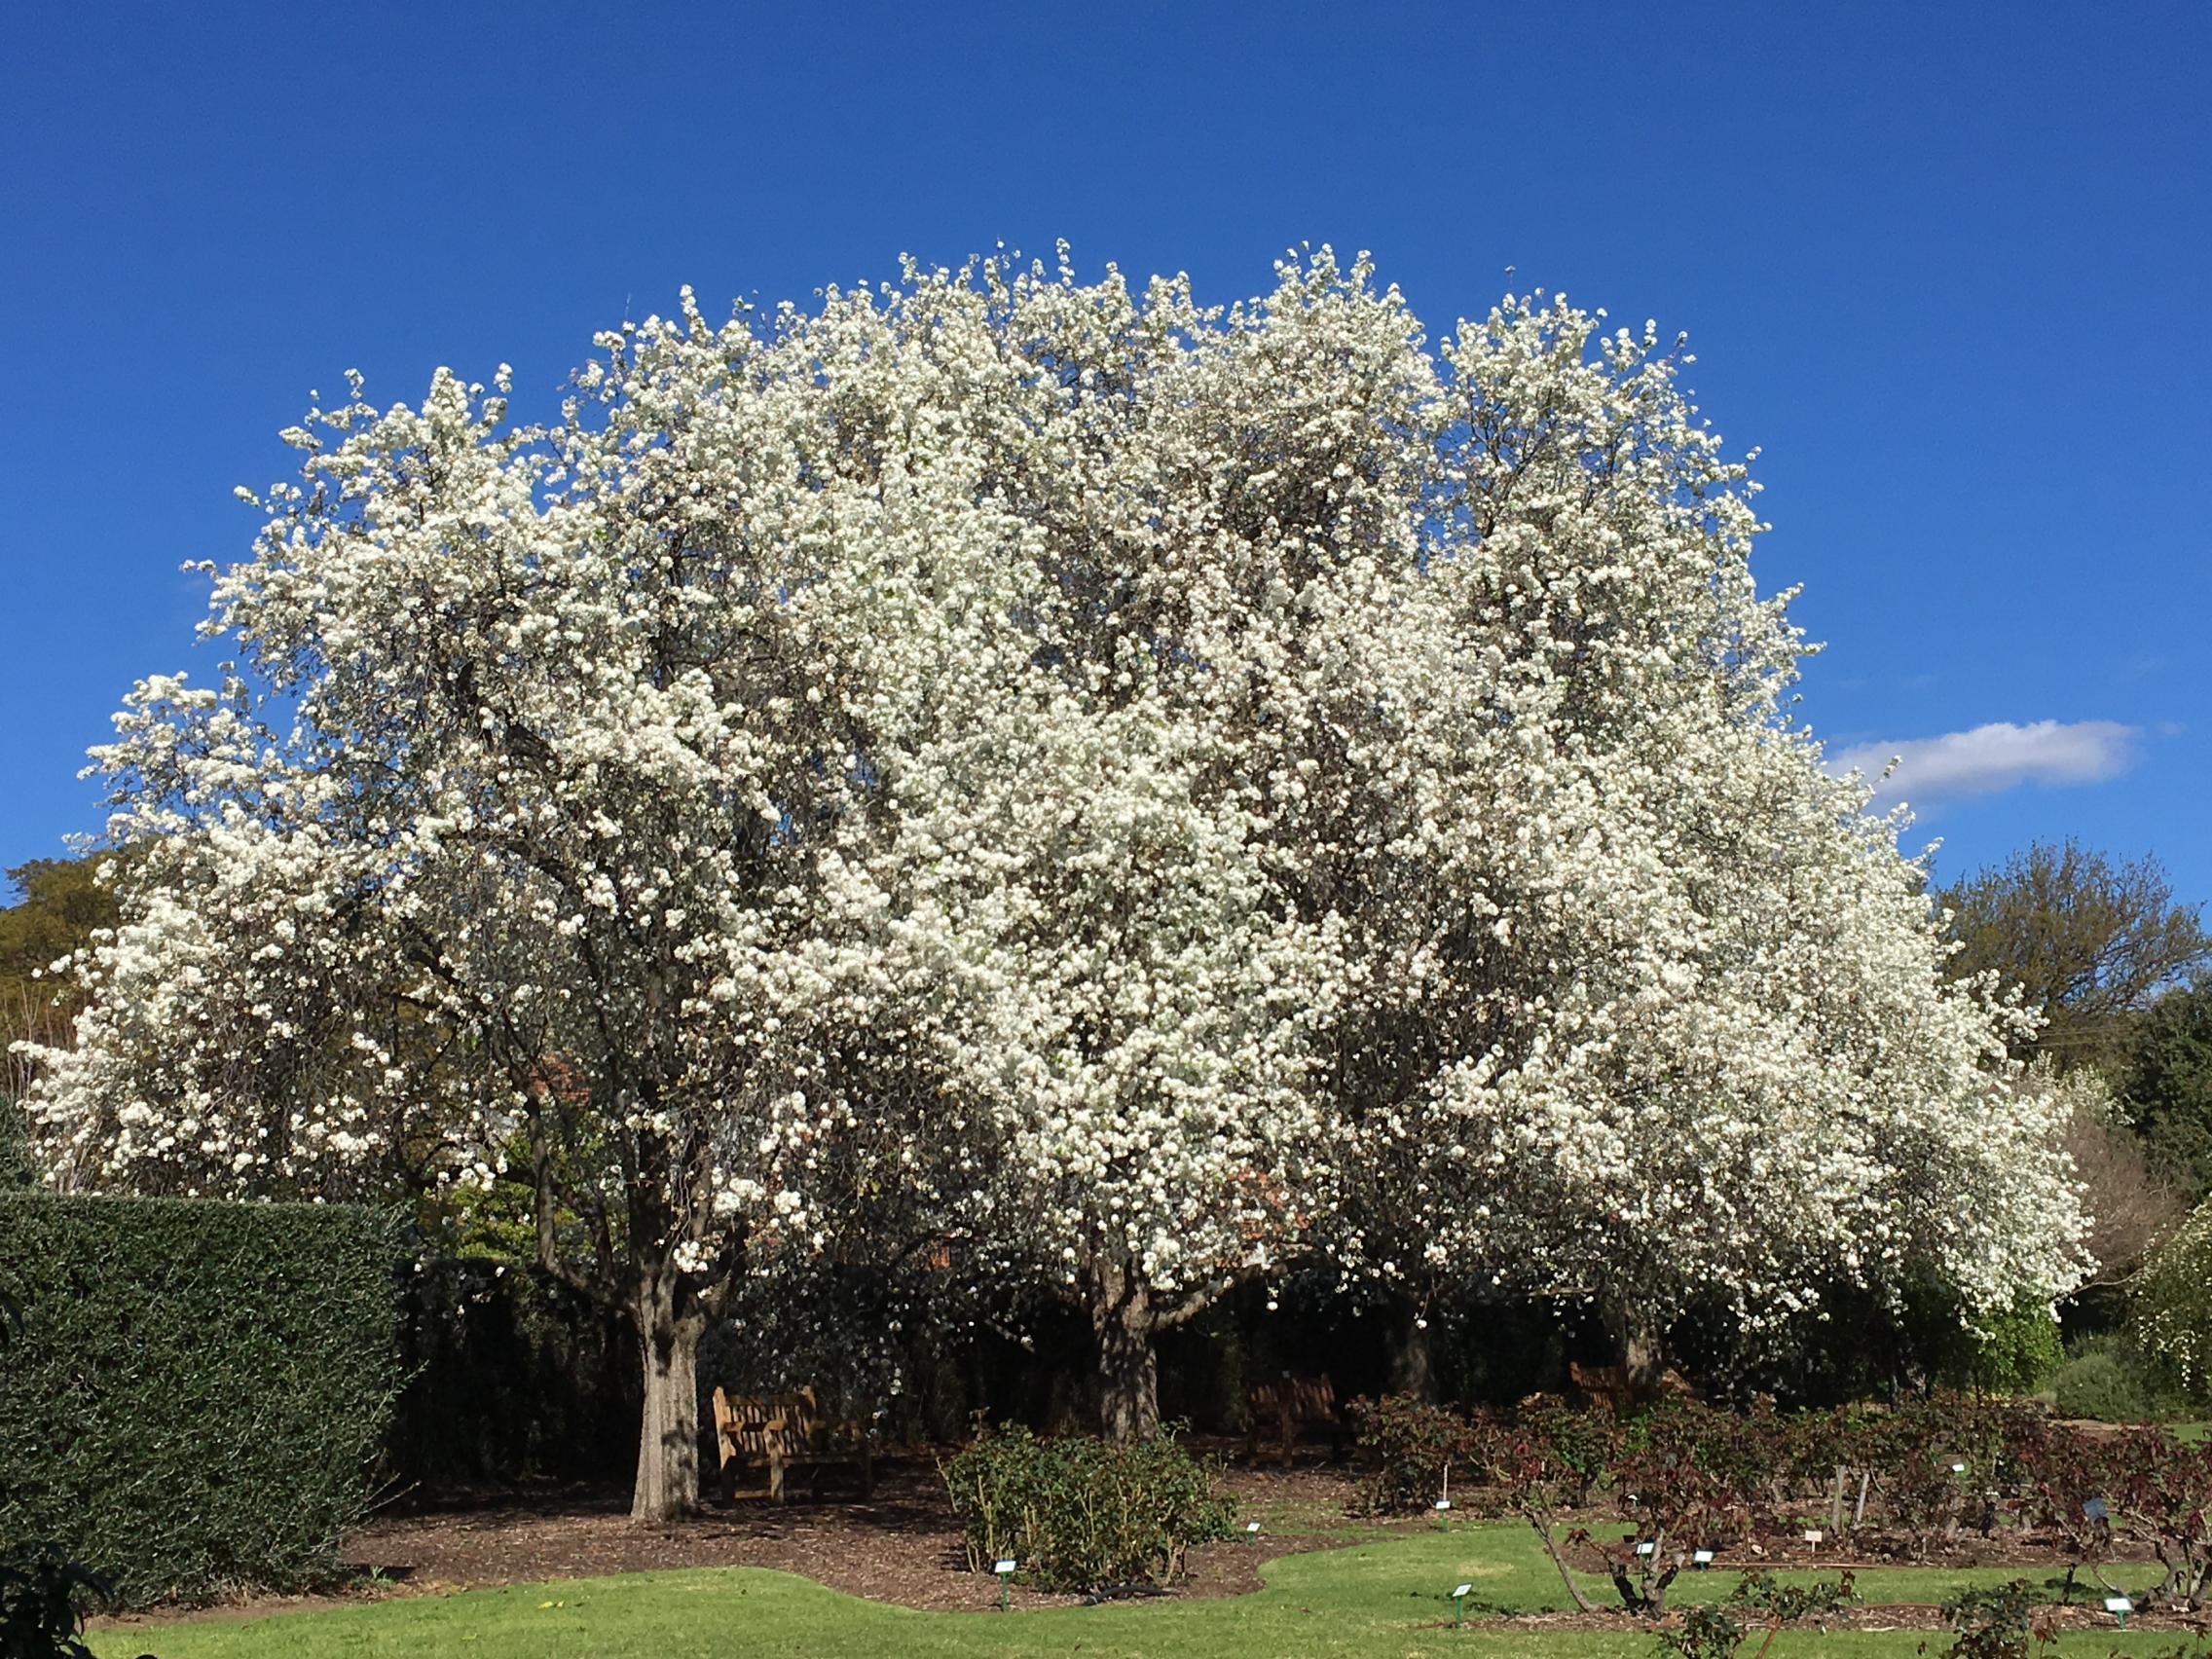 Urrbrae House Gardens, Callery Pears in blossom